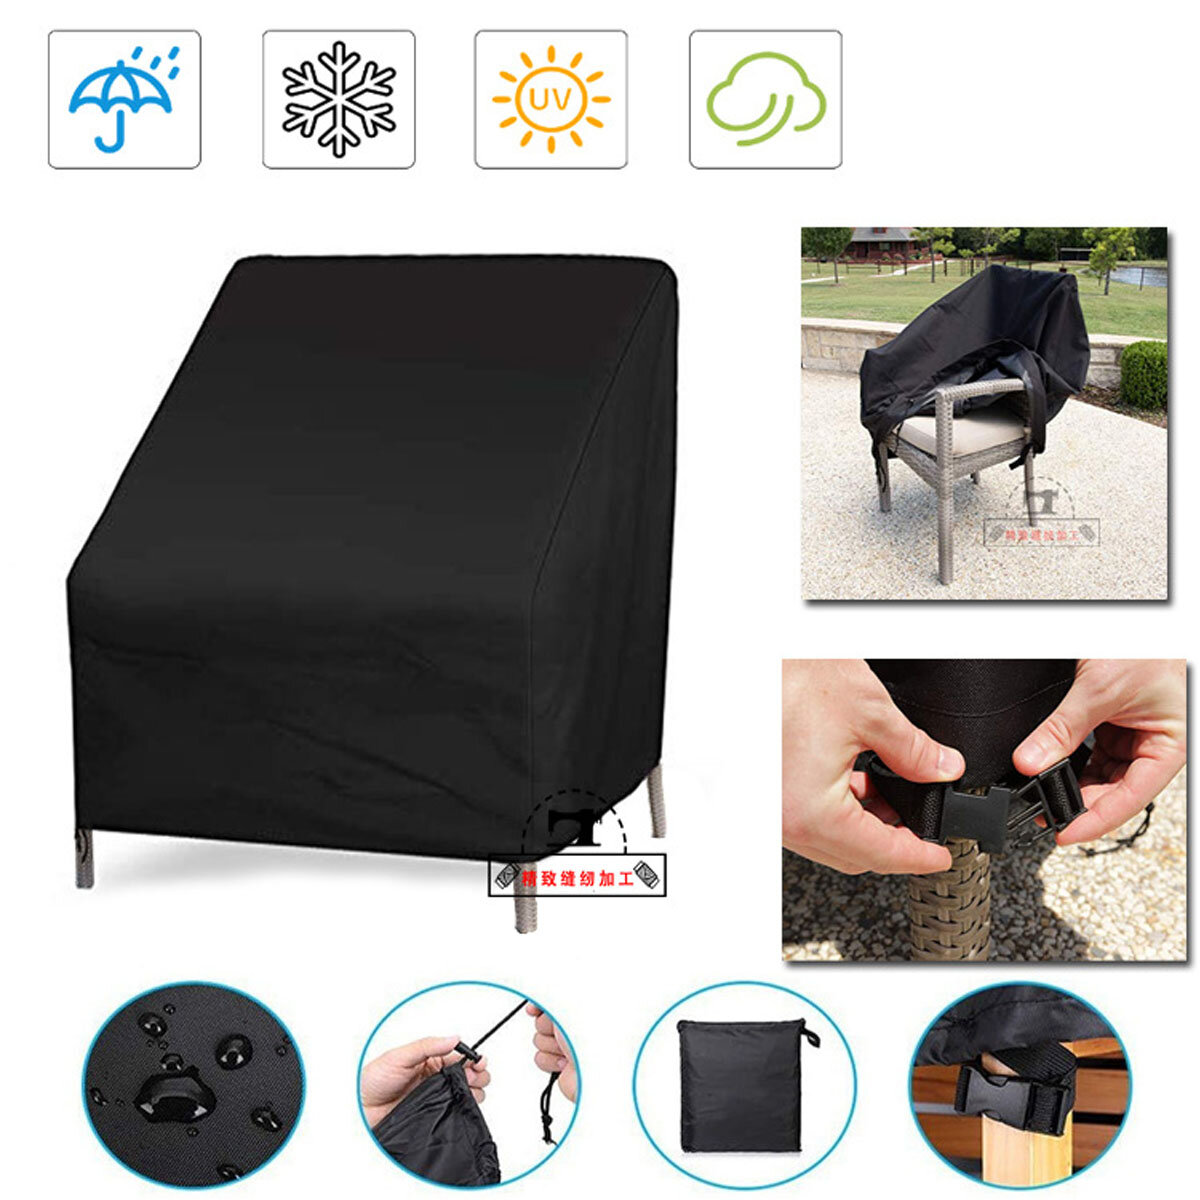 Oxford Cloth Furniture Dustproof Chair Cover For Rattan Table Cube Chair Sofa Waterproof Garden Outdoor Patio Protective Cover